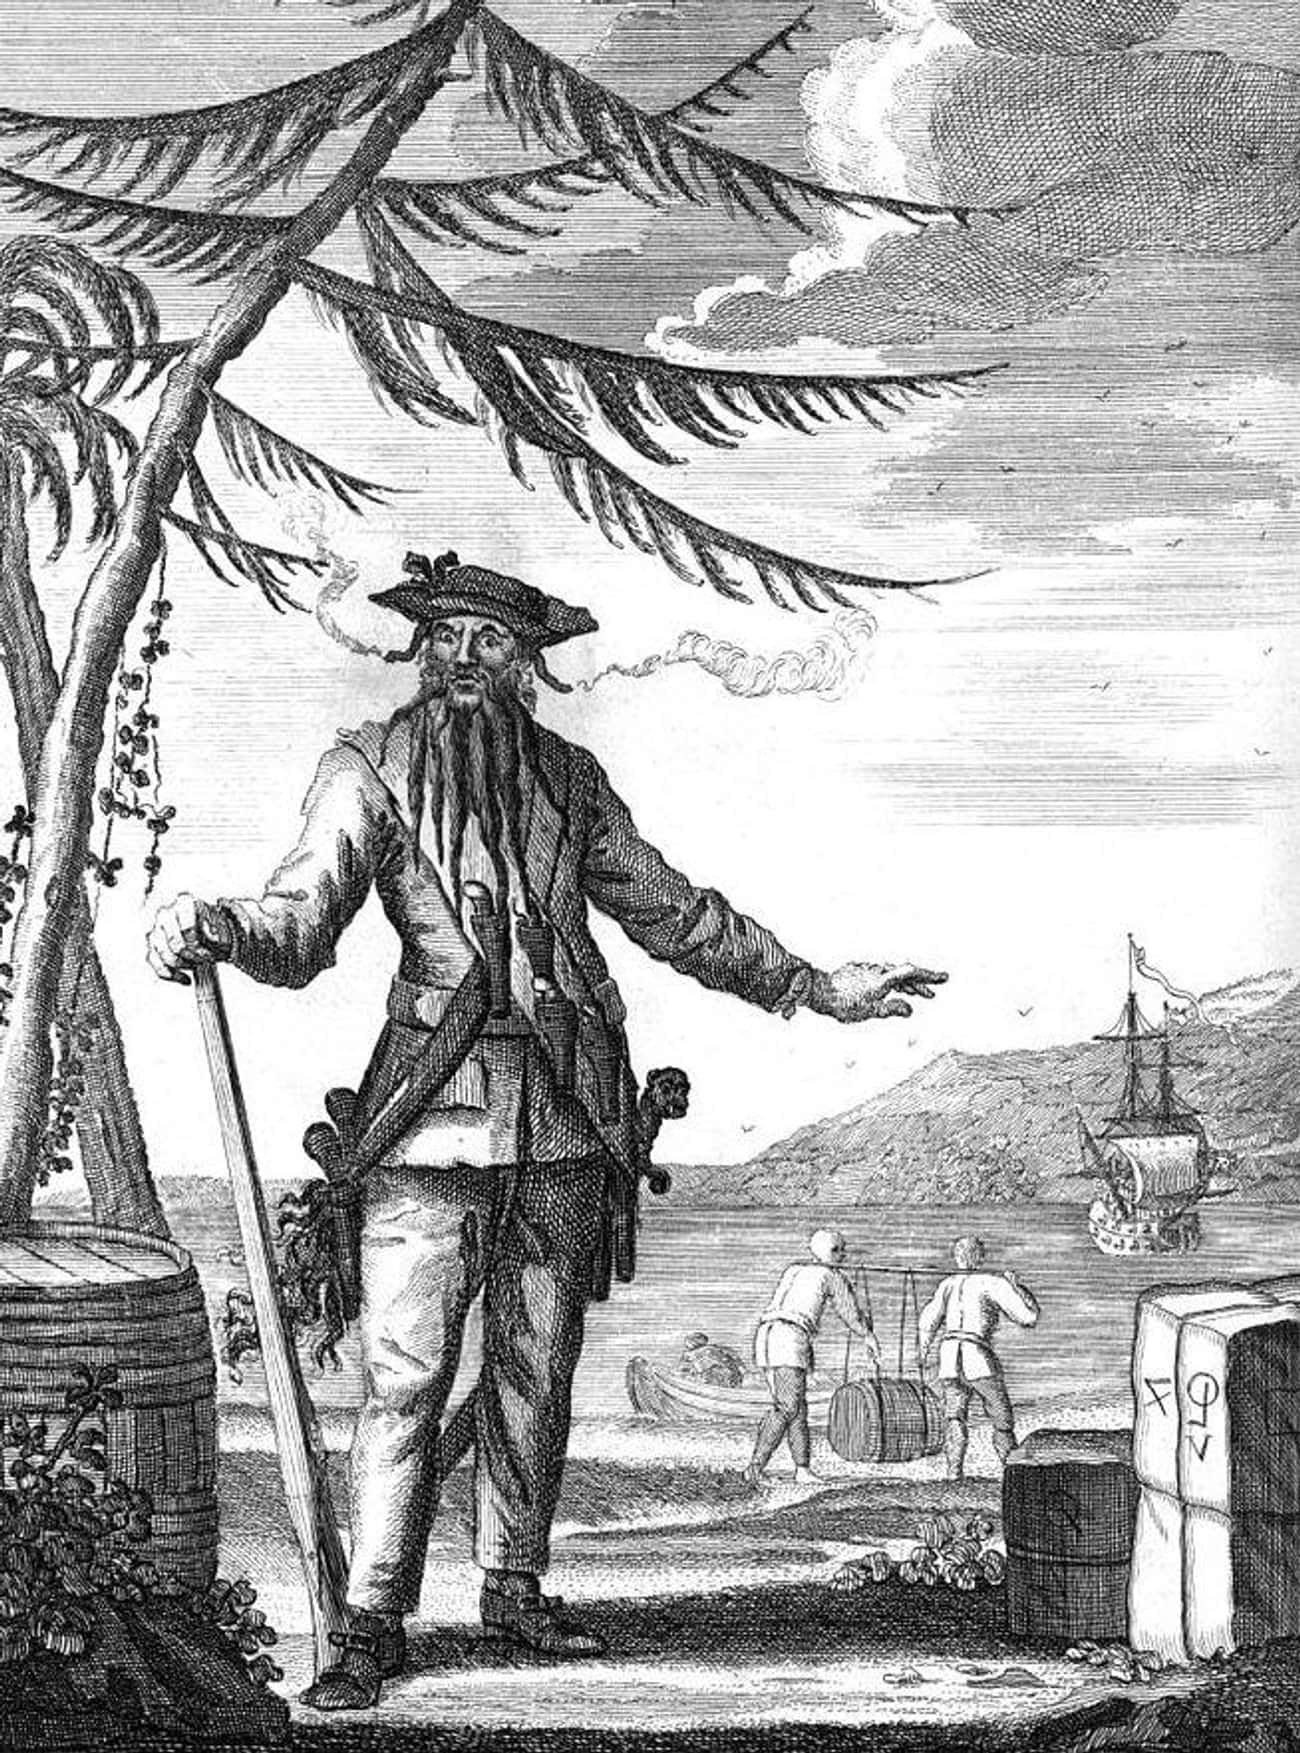 Blackbeard's Treasure May Still Be Out There